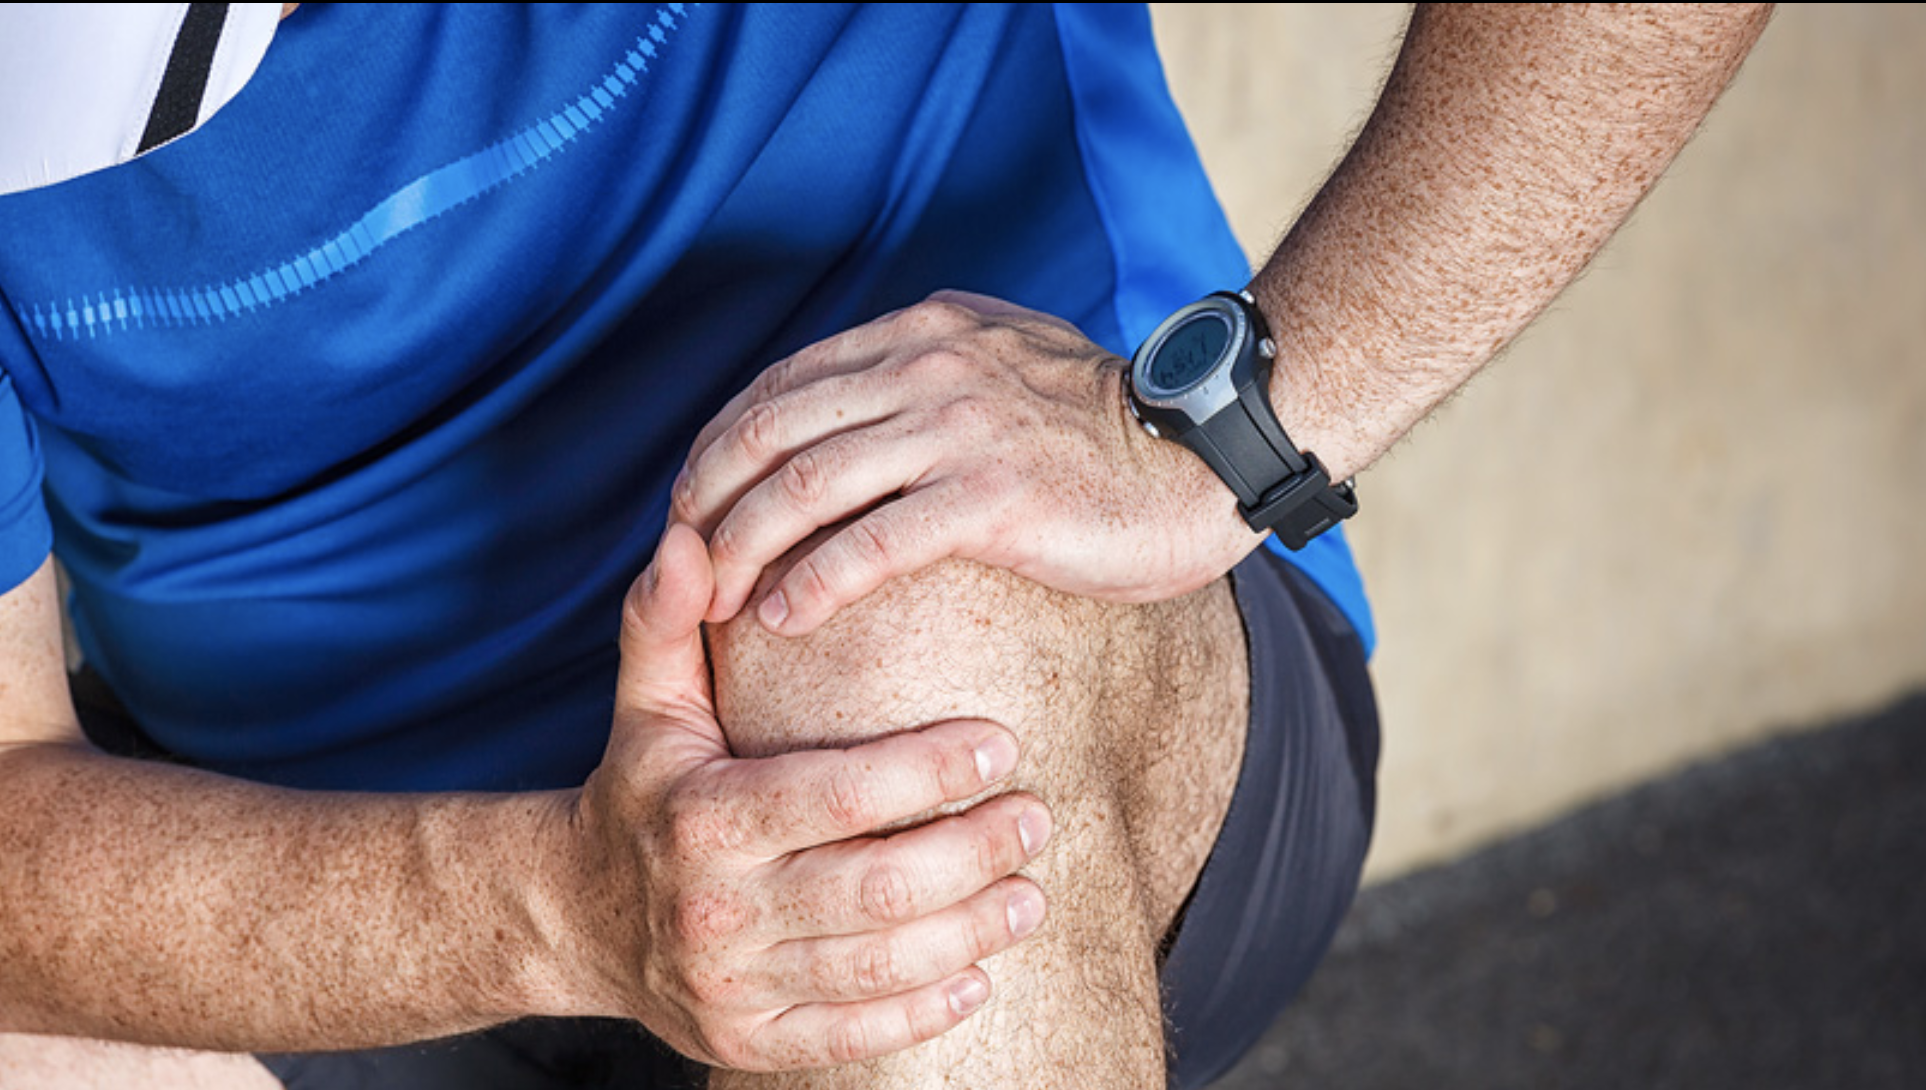 Get Non-Surgical Chronic Knee Pain Treatment At Tampa, FL Orthopedic Clinic